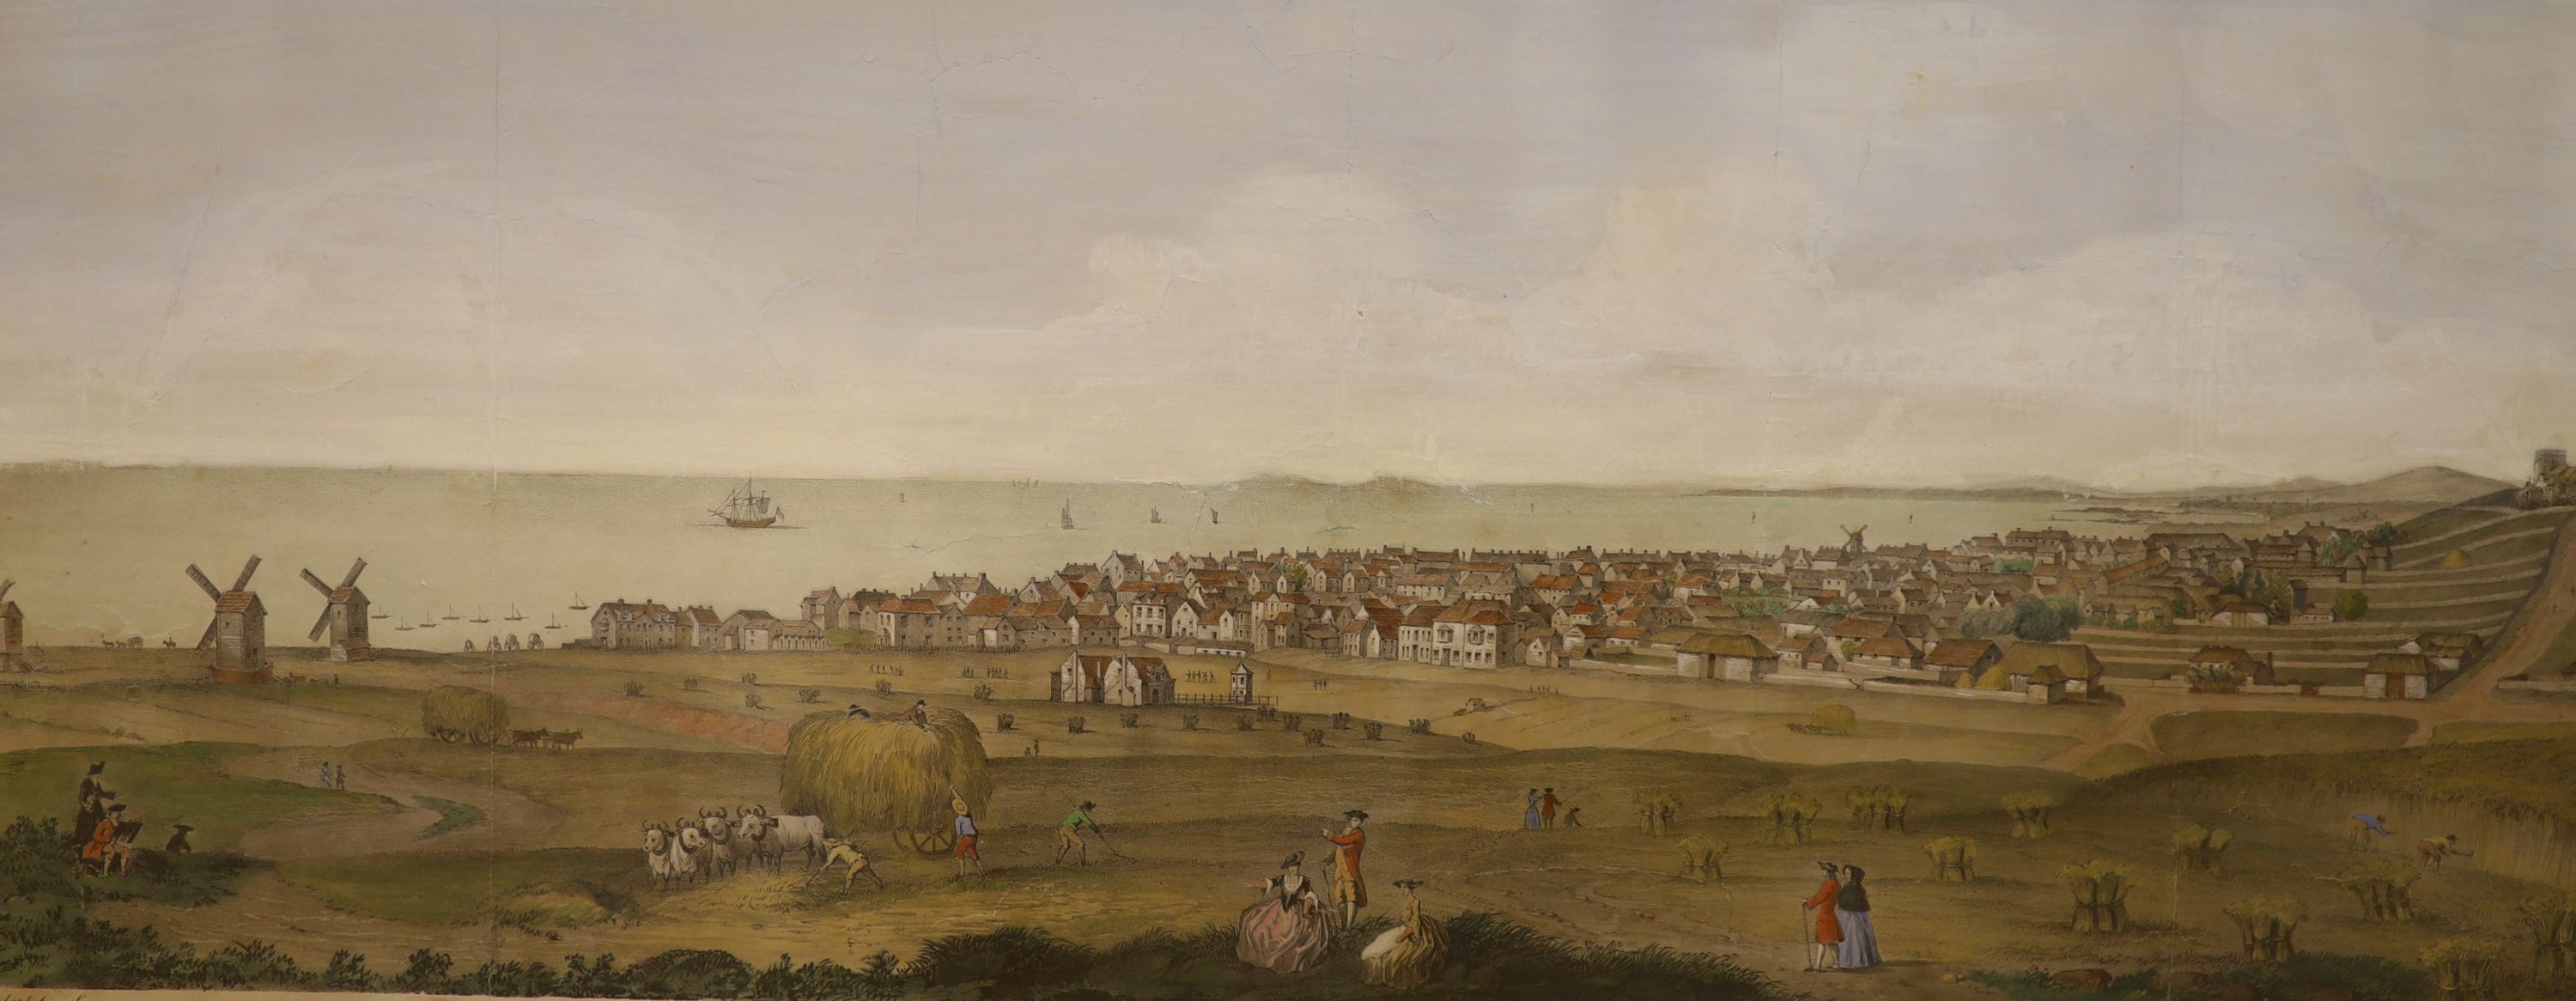 After James Lambert (1725-1788), coloured lithograph, A Perspective View of Brighthelmston, and of the Sea Coast as far as the Isle of